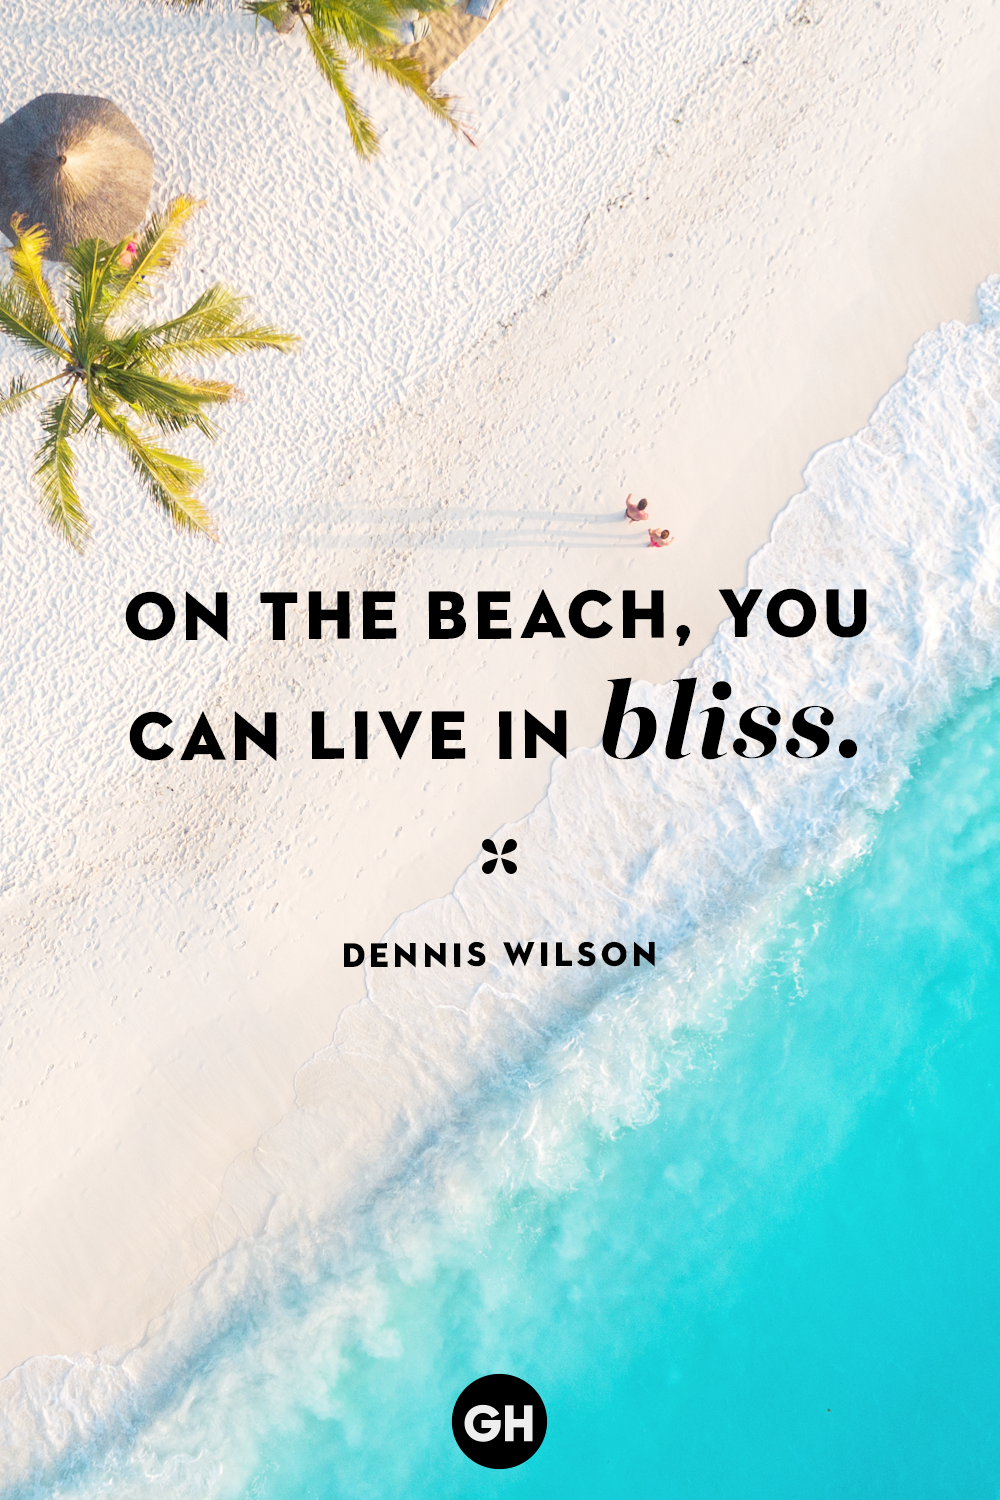 quotes about beach life